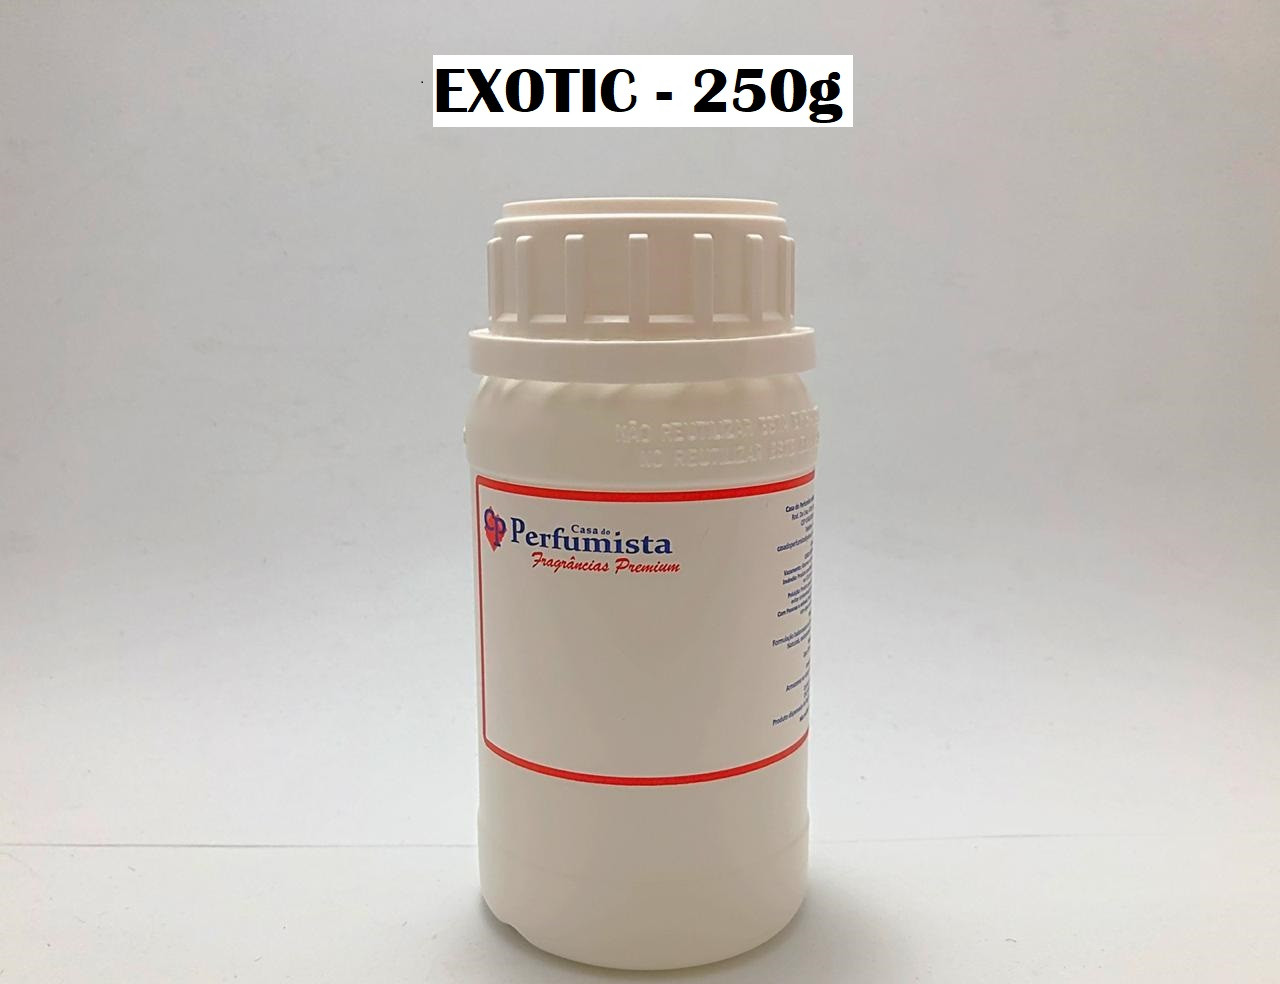 EXOTIC - 250g